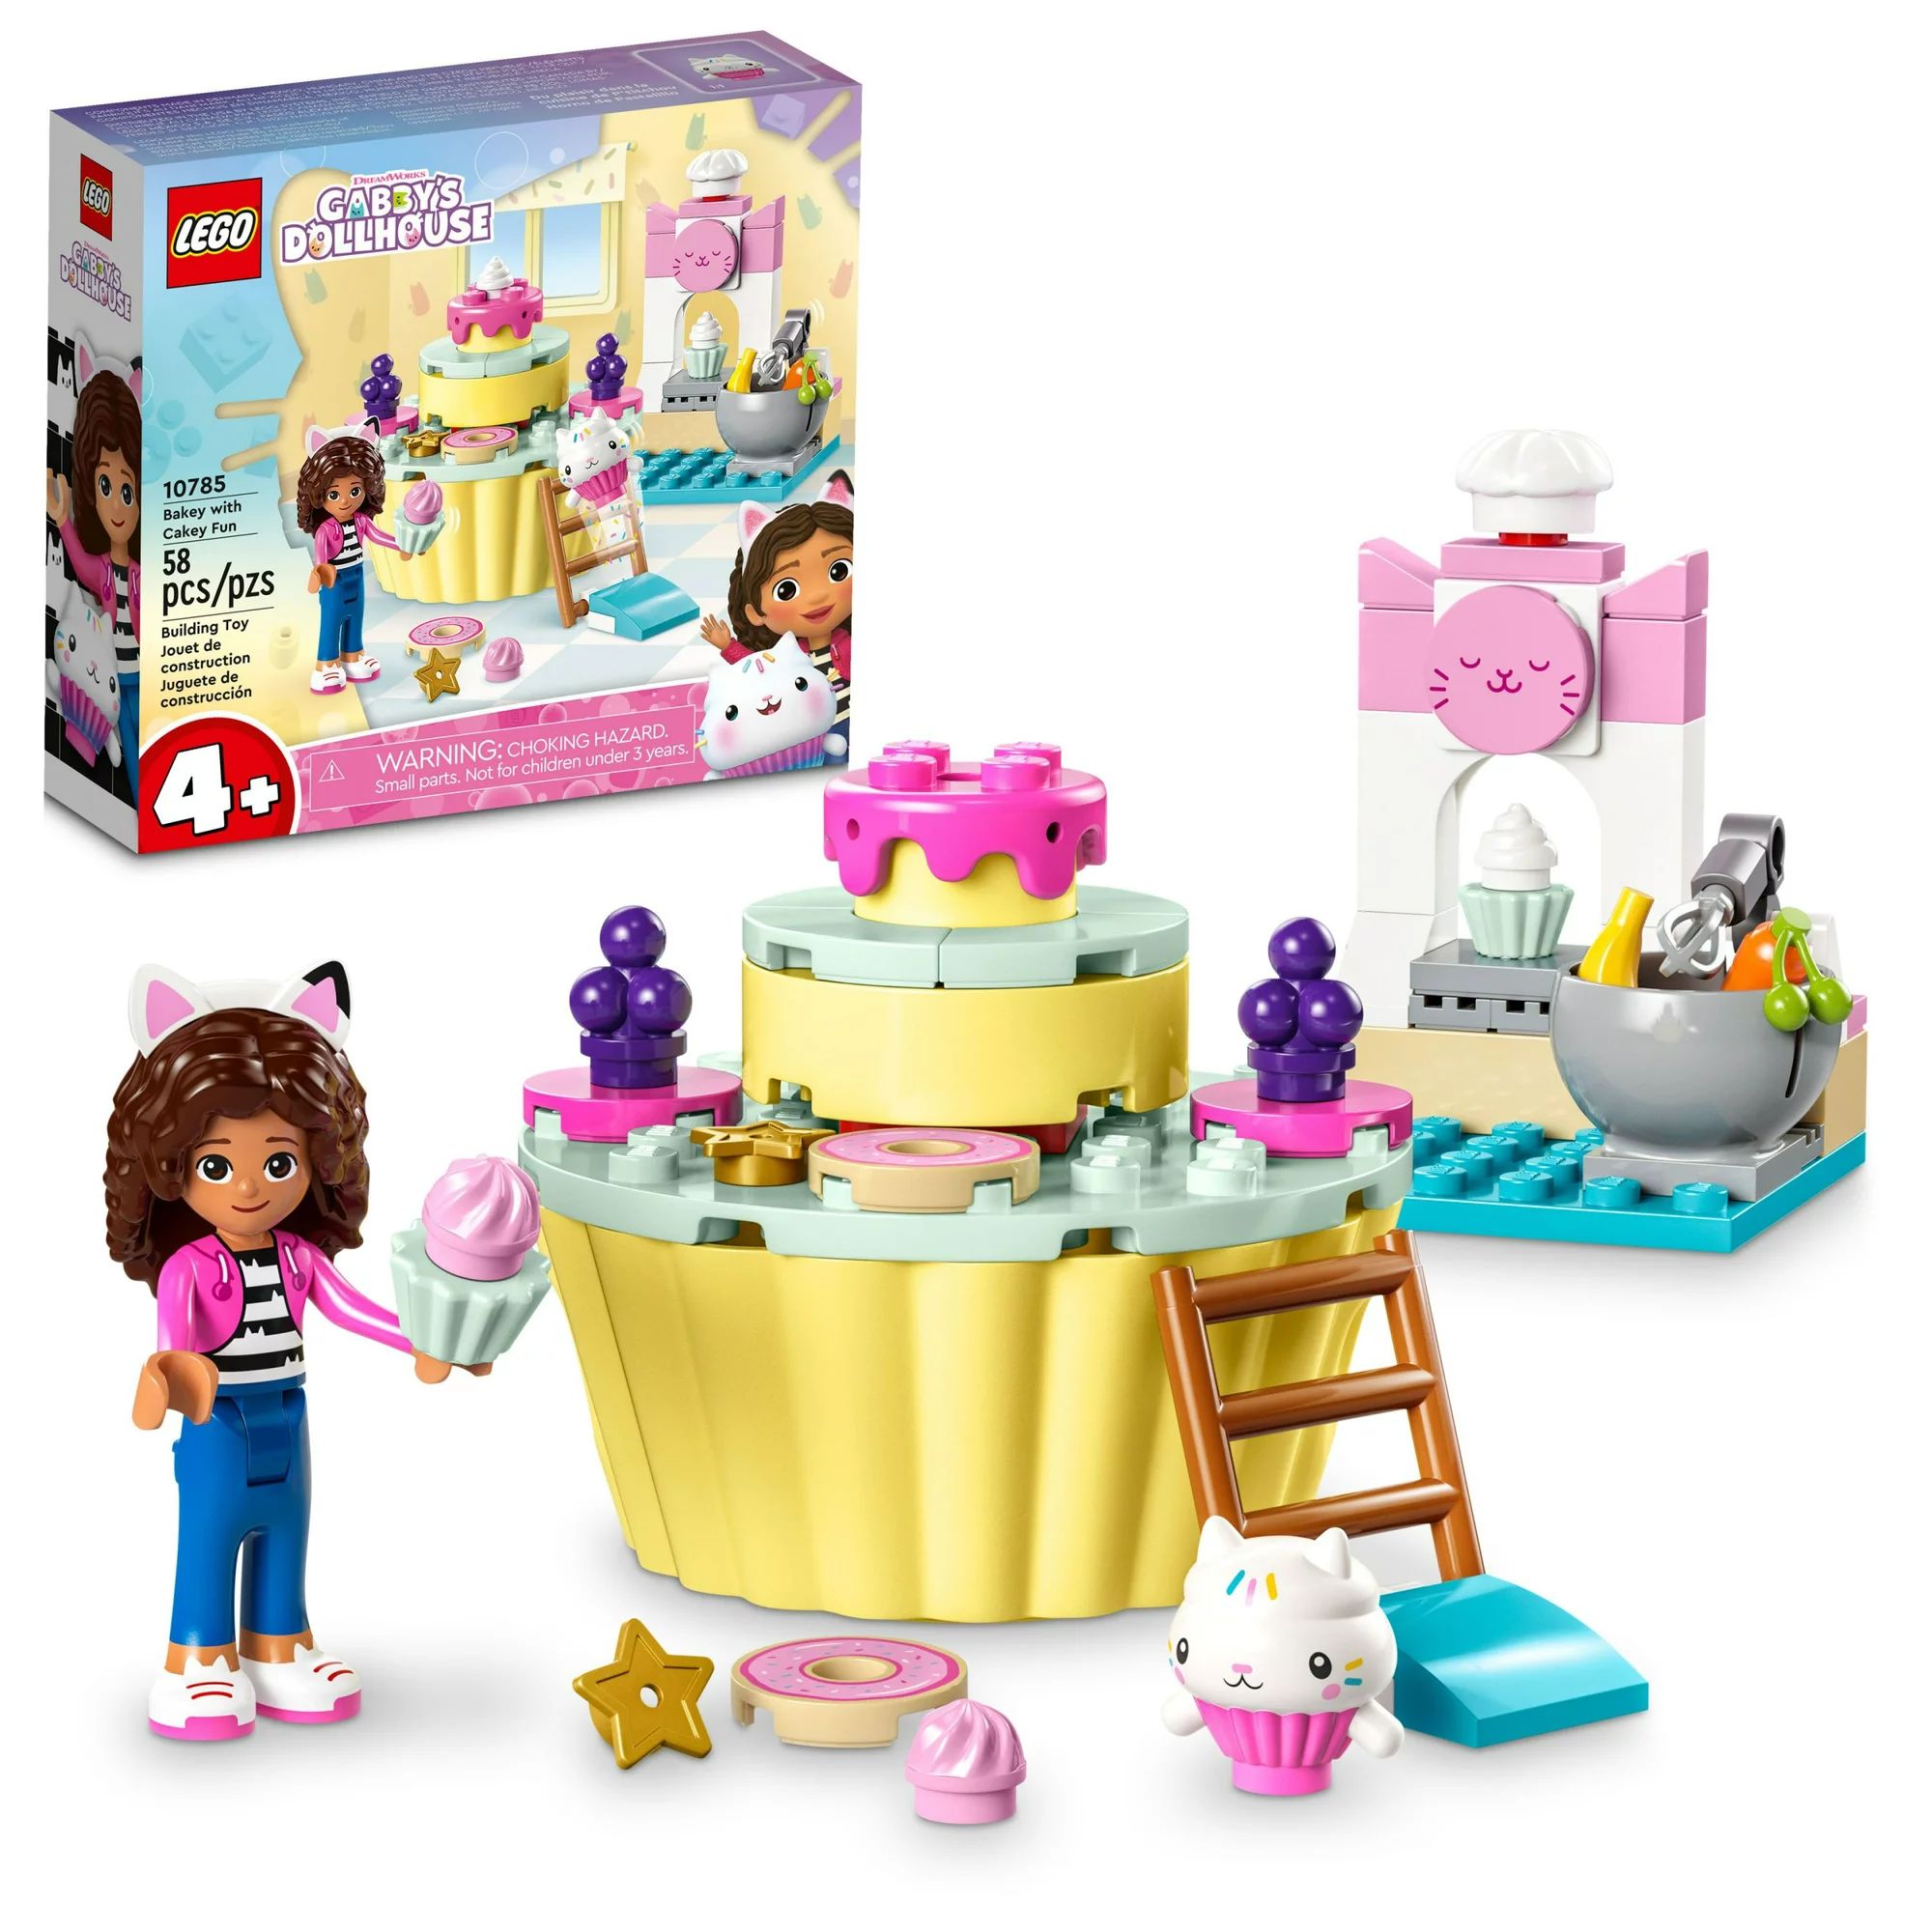 LEGO Gabby's Dollhouse Bakey With Cakey Fun 10785 Building Toy Set for Fans of the DreamWorks Ani... | Walmart (US)